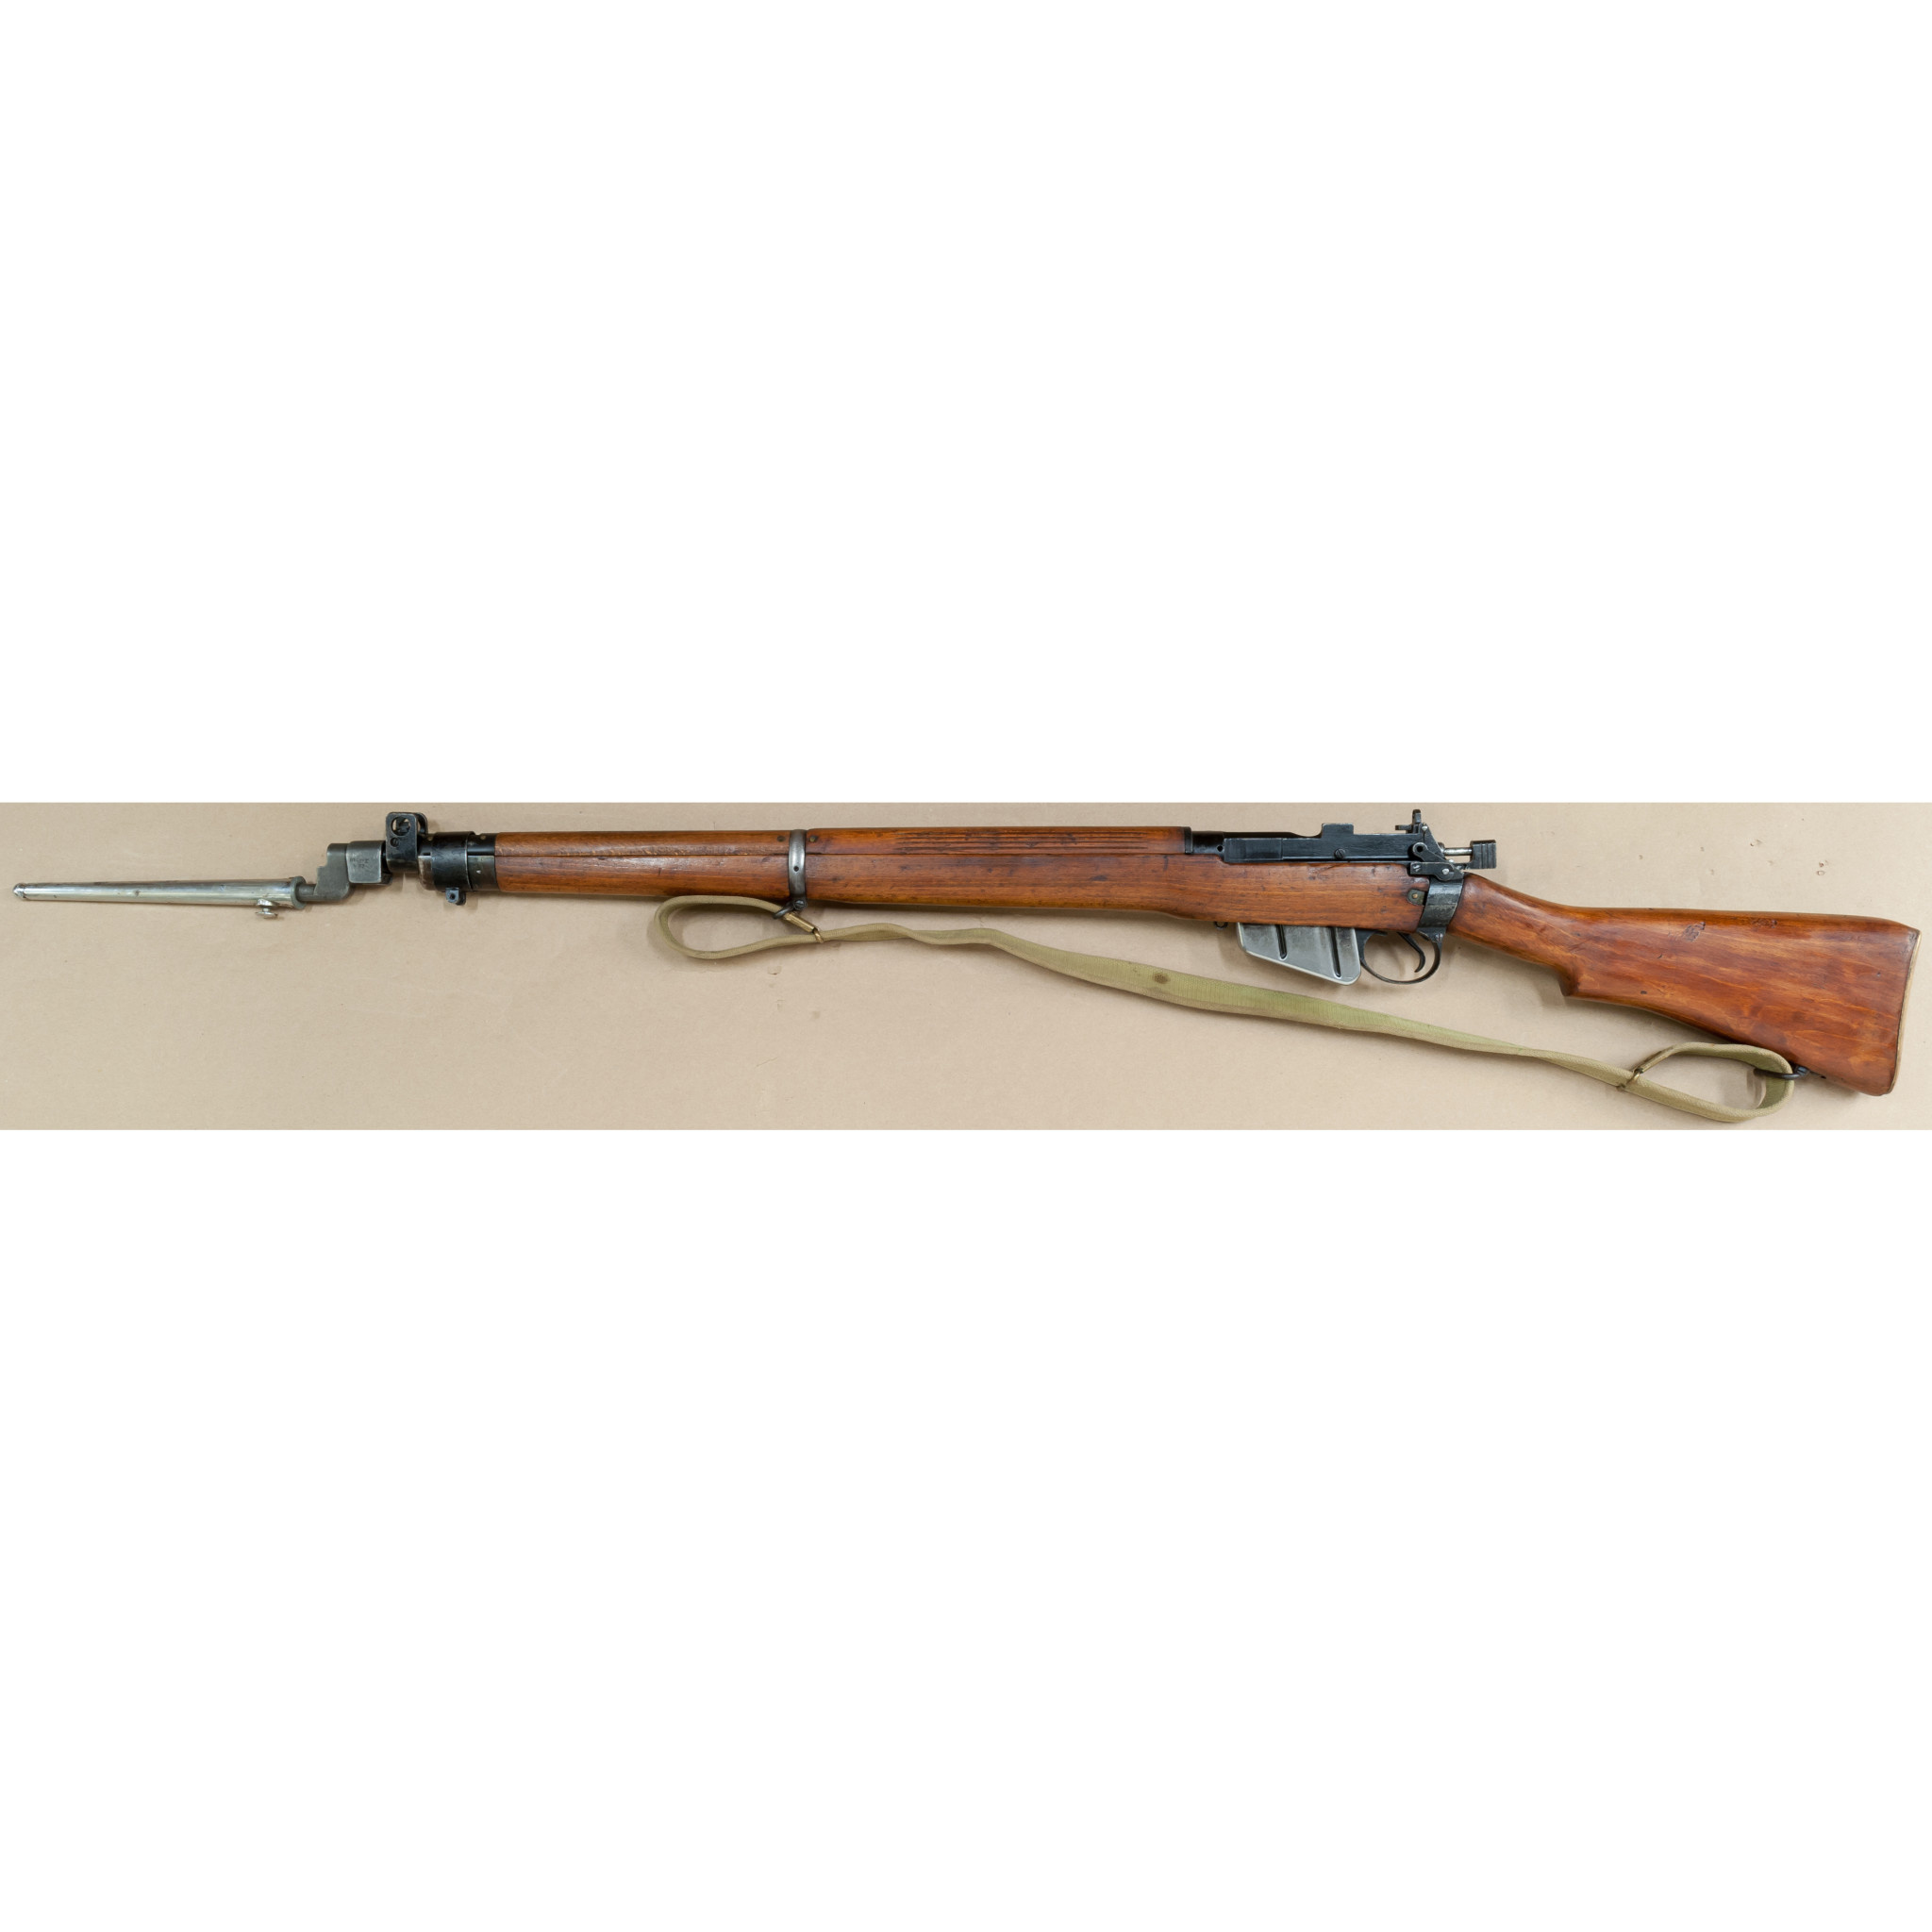 LEE ENFIELD NO 4 MK 1 FULL WOOD STOCK RIFLE 303 BRIT - Goble's